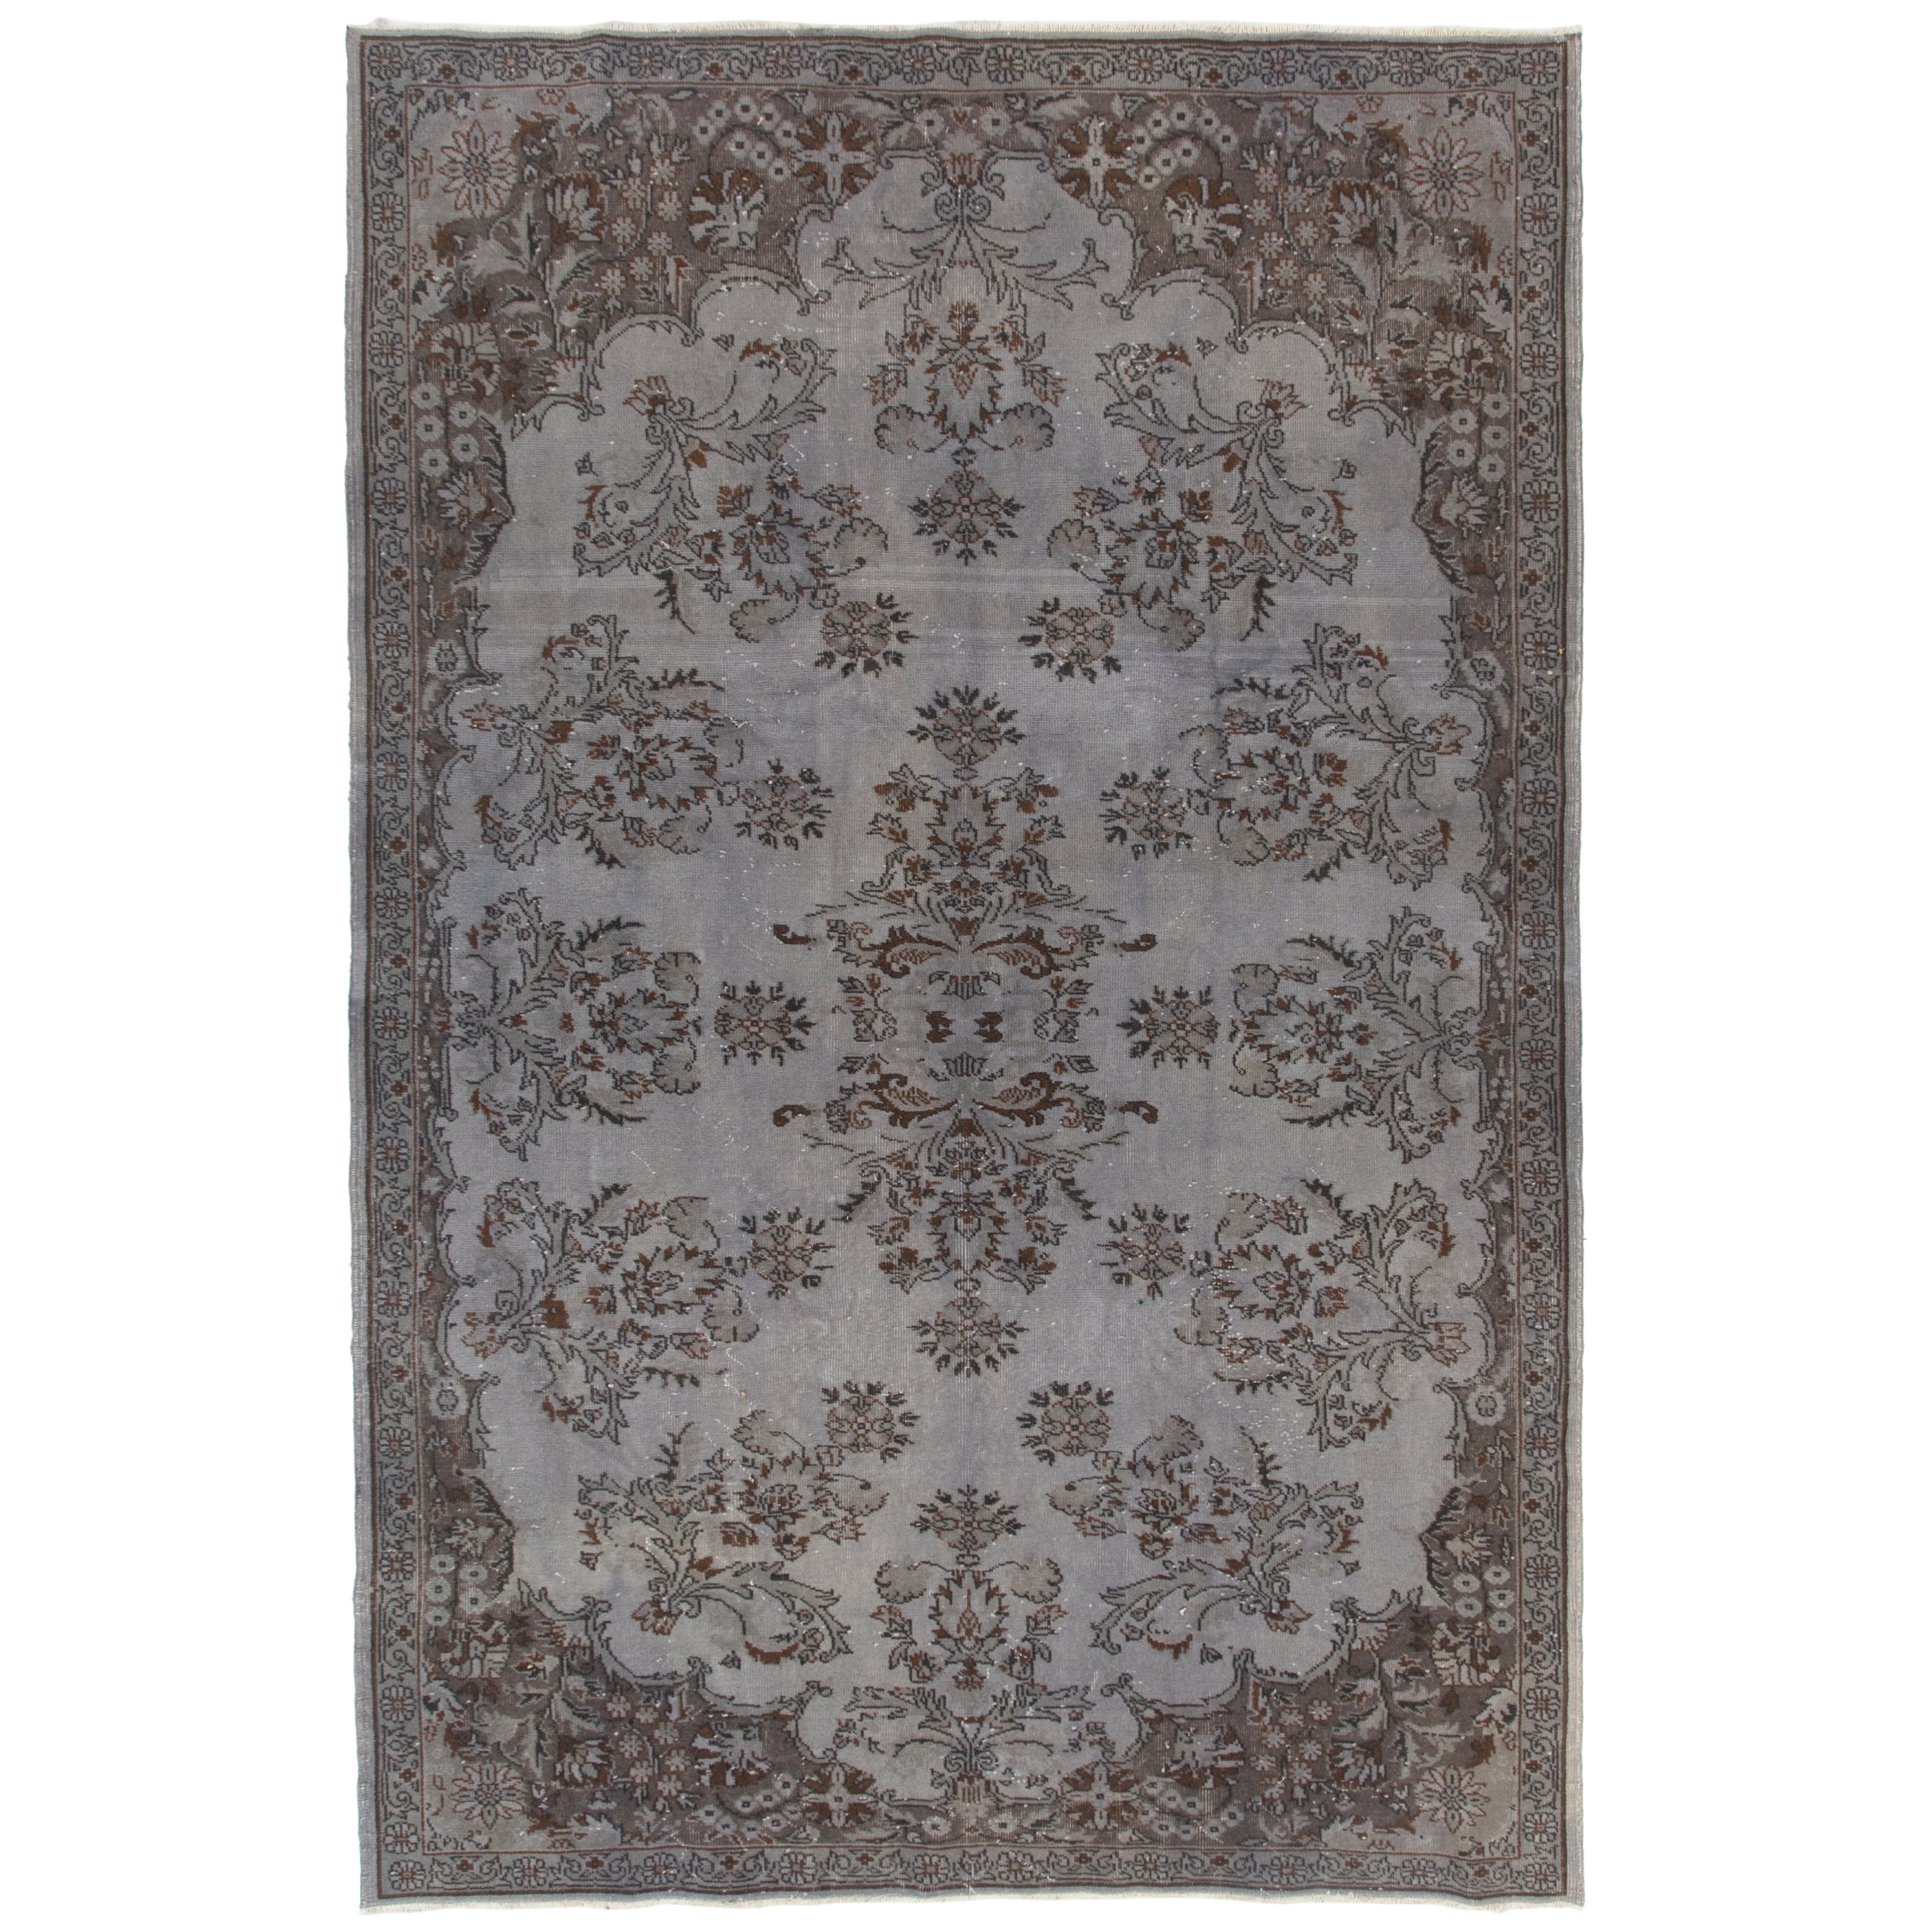 7x10.5 Ft Hand Knotted Vintage Turkish Rug Re-Dyed in Gray for Modern Interiors